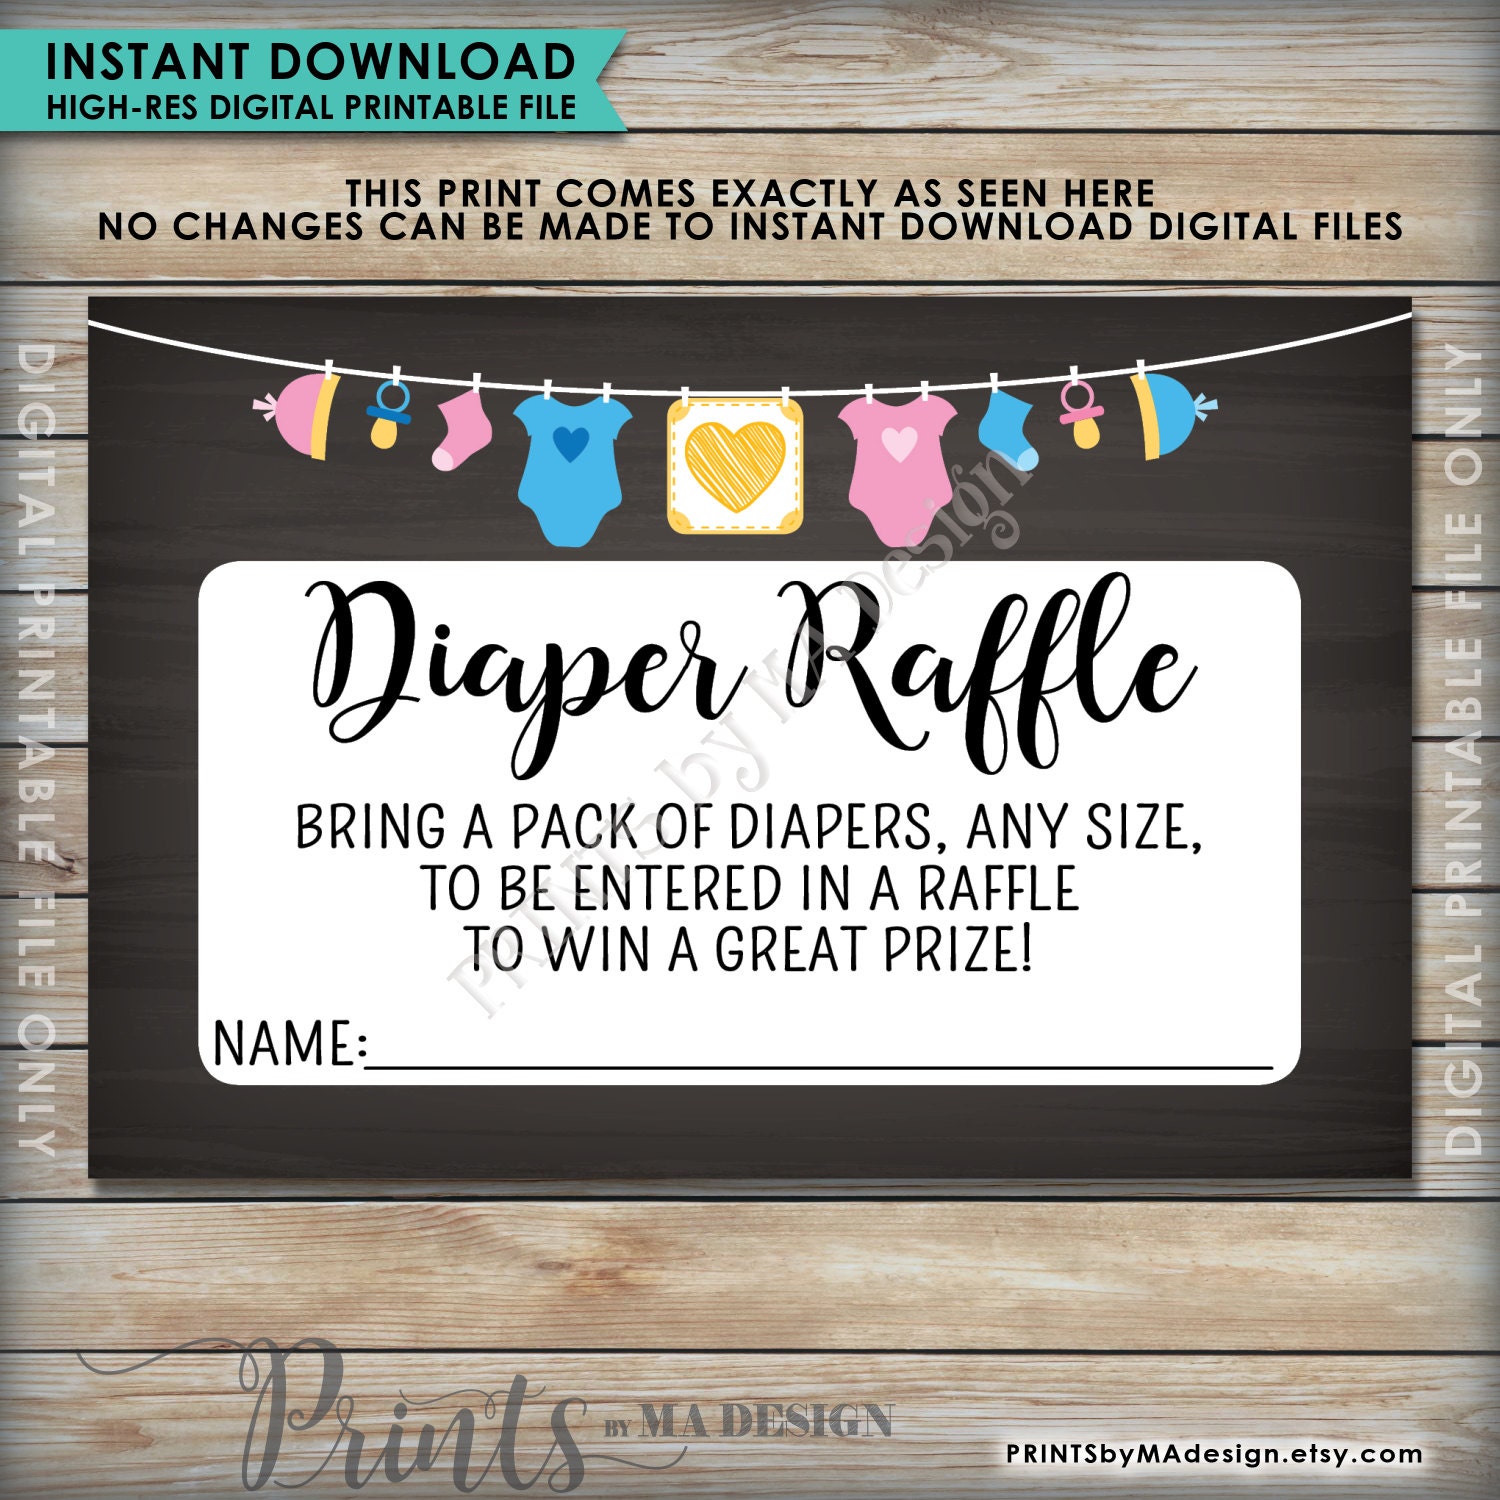 diaper-raffle-ticket-bring-diapers-to-win-a-prize-baby-shower-raffle-4x6-instant-download